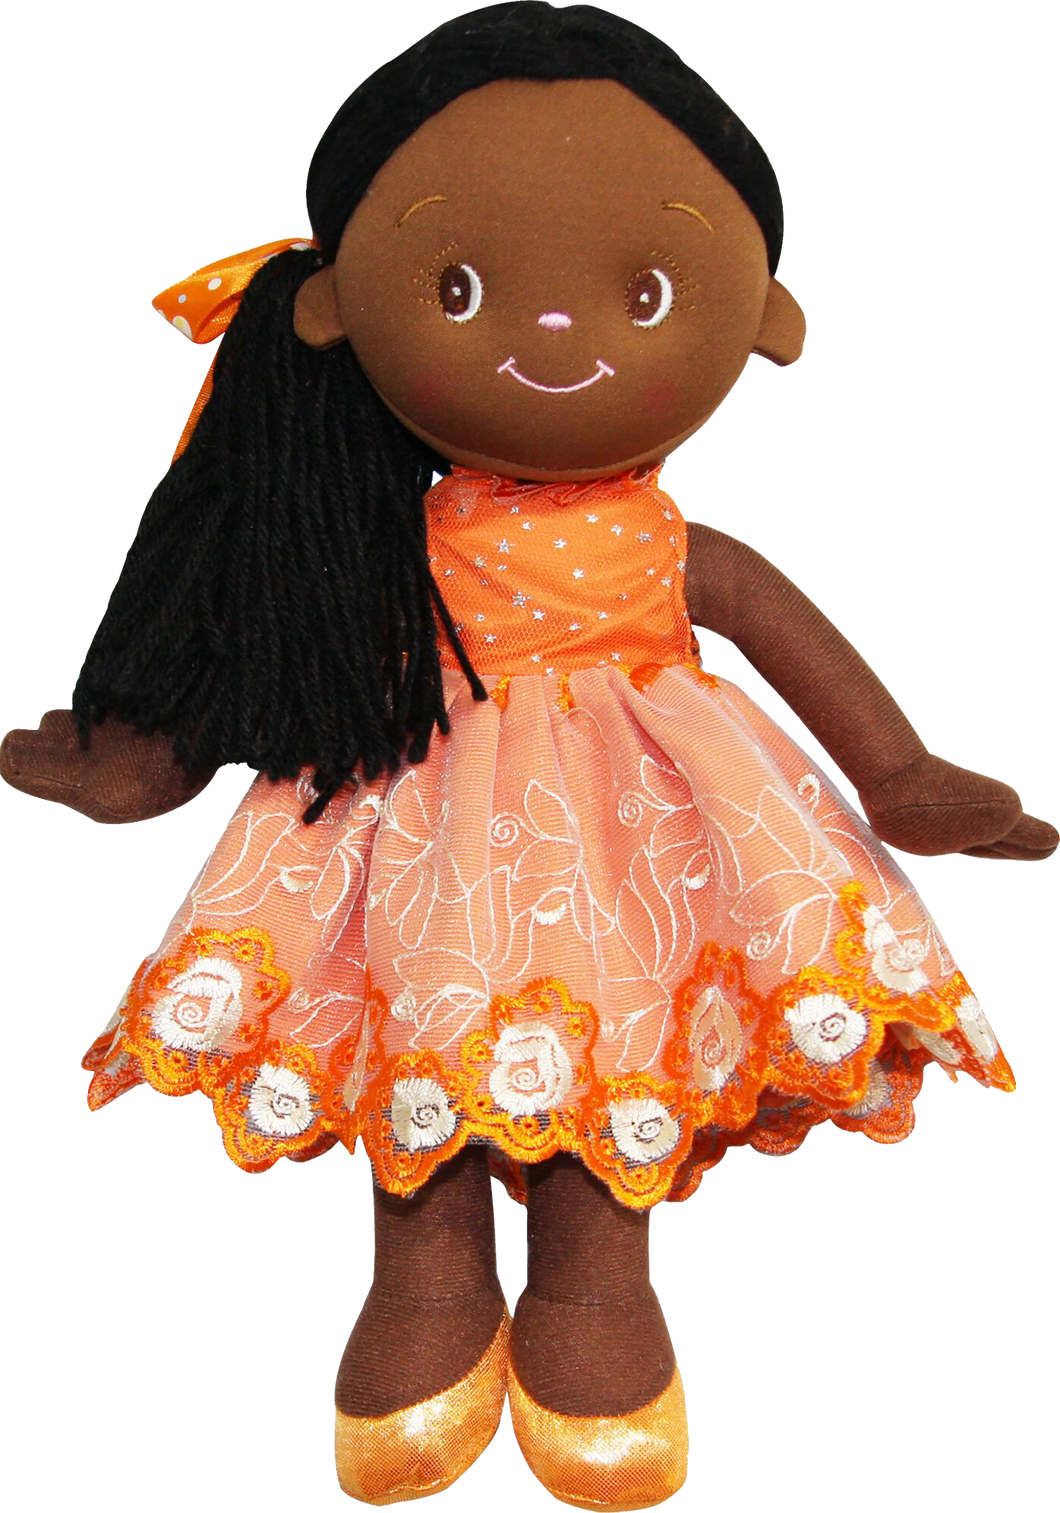 Every little girl will love Valentina Rag Doll, she has a beautiful Orange dress on with silver stars and embroidered flowers, little girls will love her polka dot bow in her hair and can have fun playing with her hair, she will love to have tea parties with other dolls.